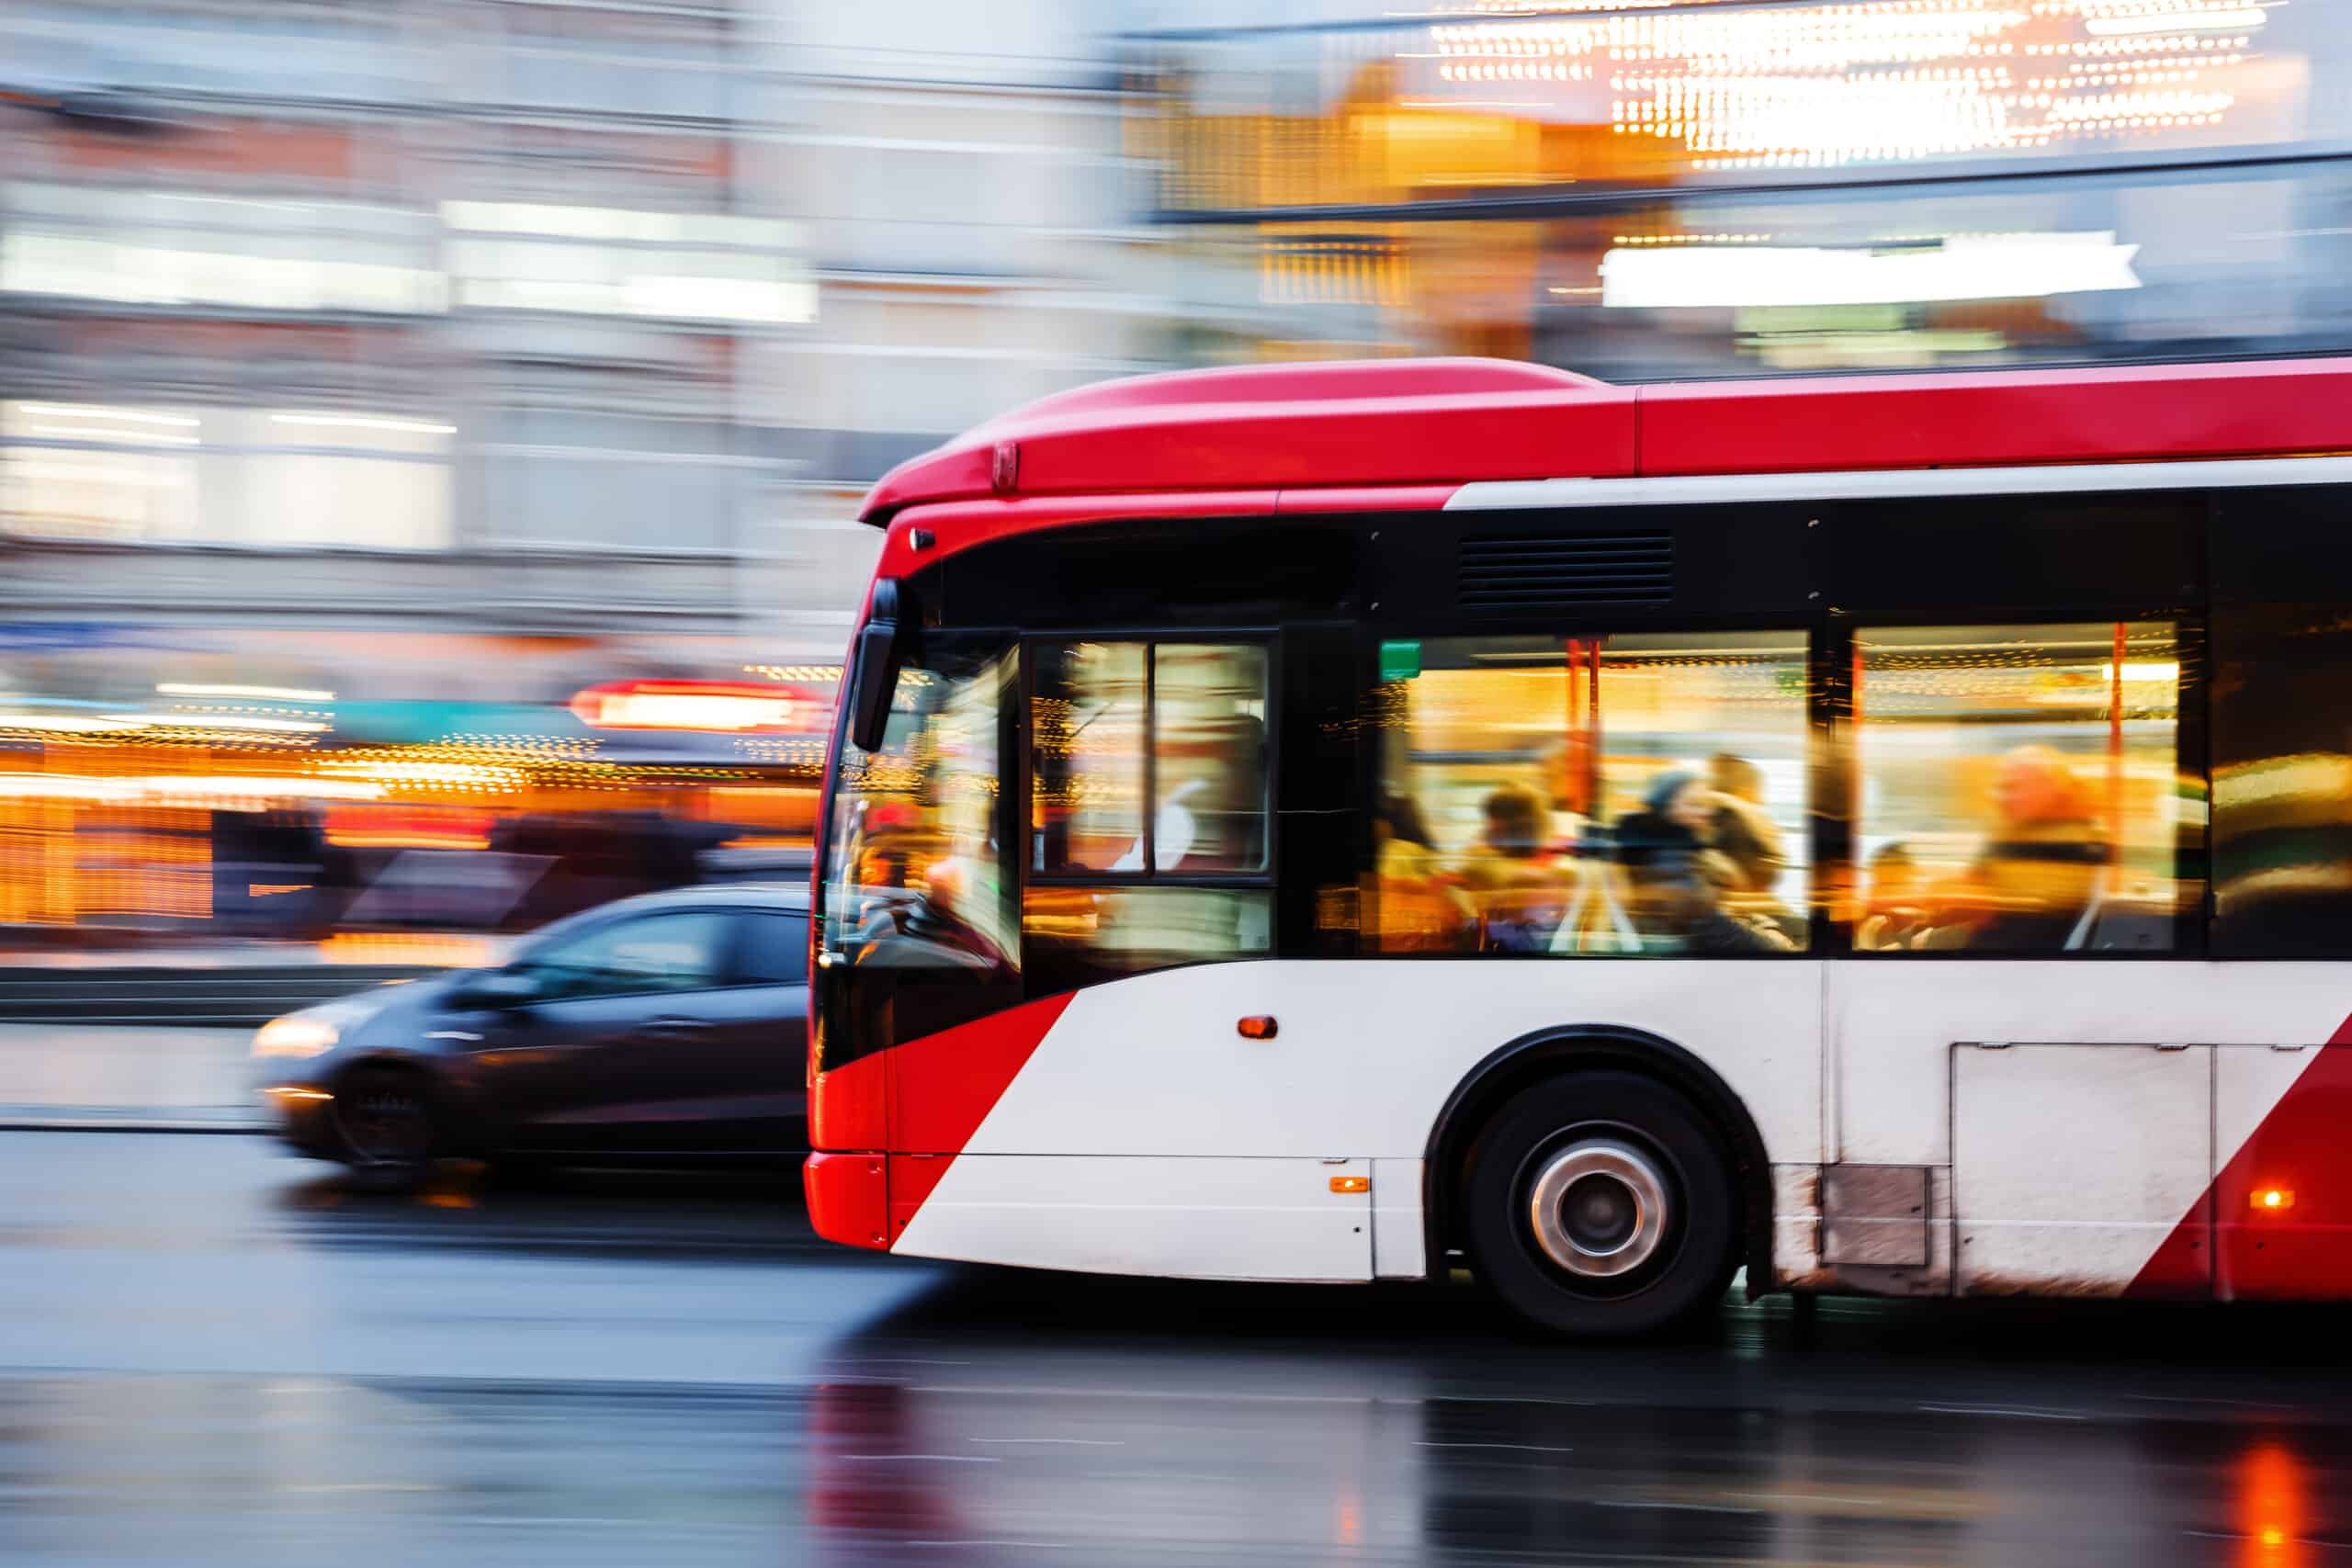 <p>Public transportation is not only cheaper than taxis or car rentals, but it also offers a slice of everyday local life. Buses, trains, and metros are cost-effective ways to explore a city. For longer distances, overnight buses or trains can save a day’s accommodation cost.</p>